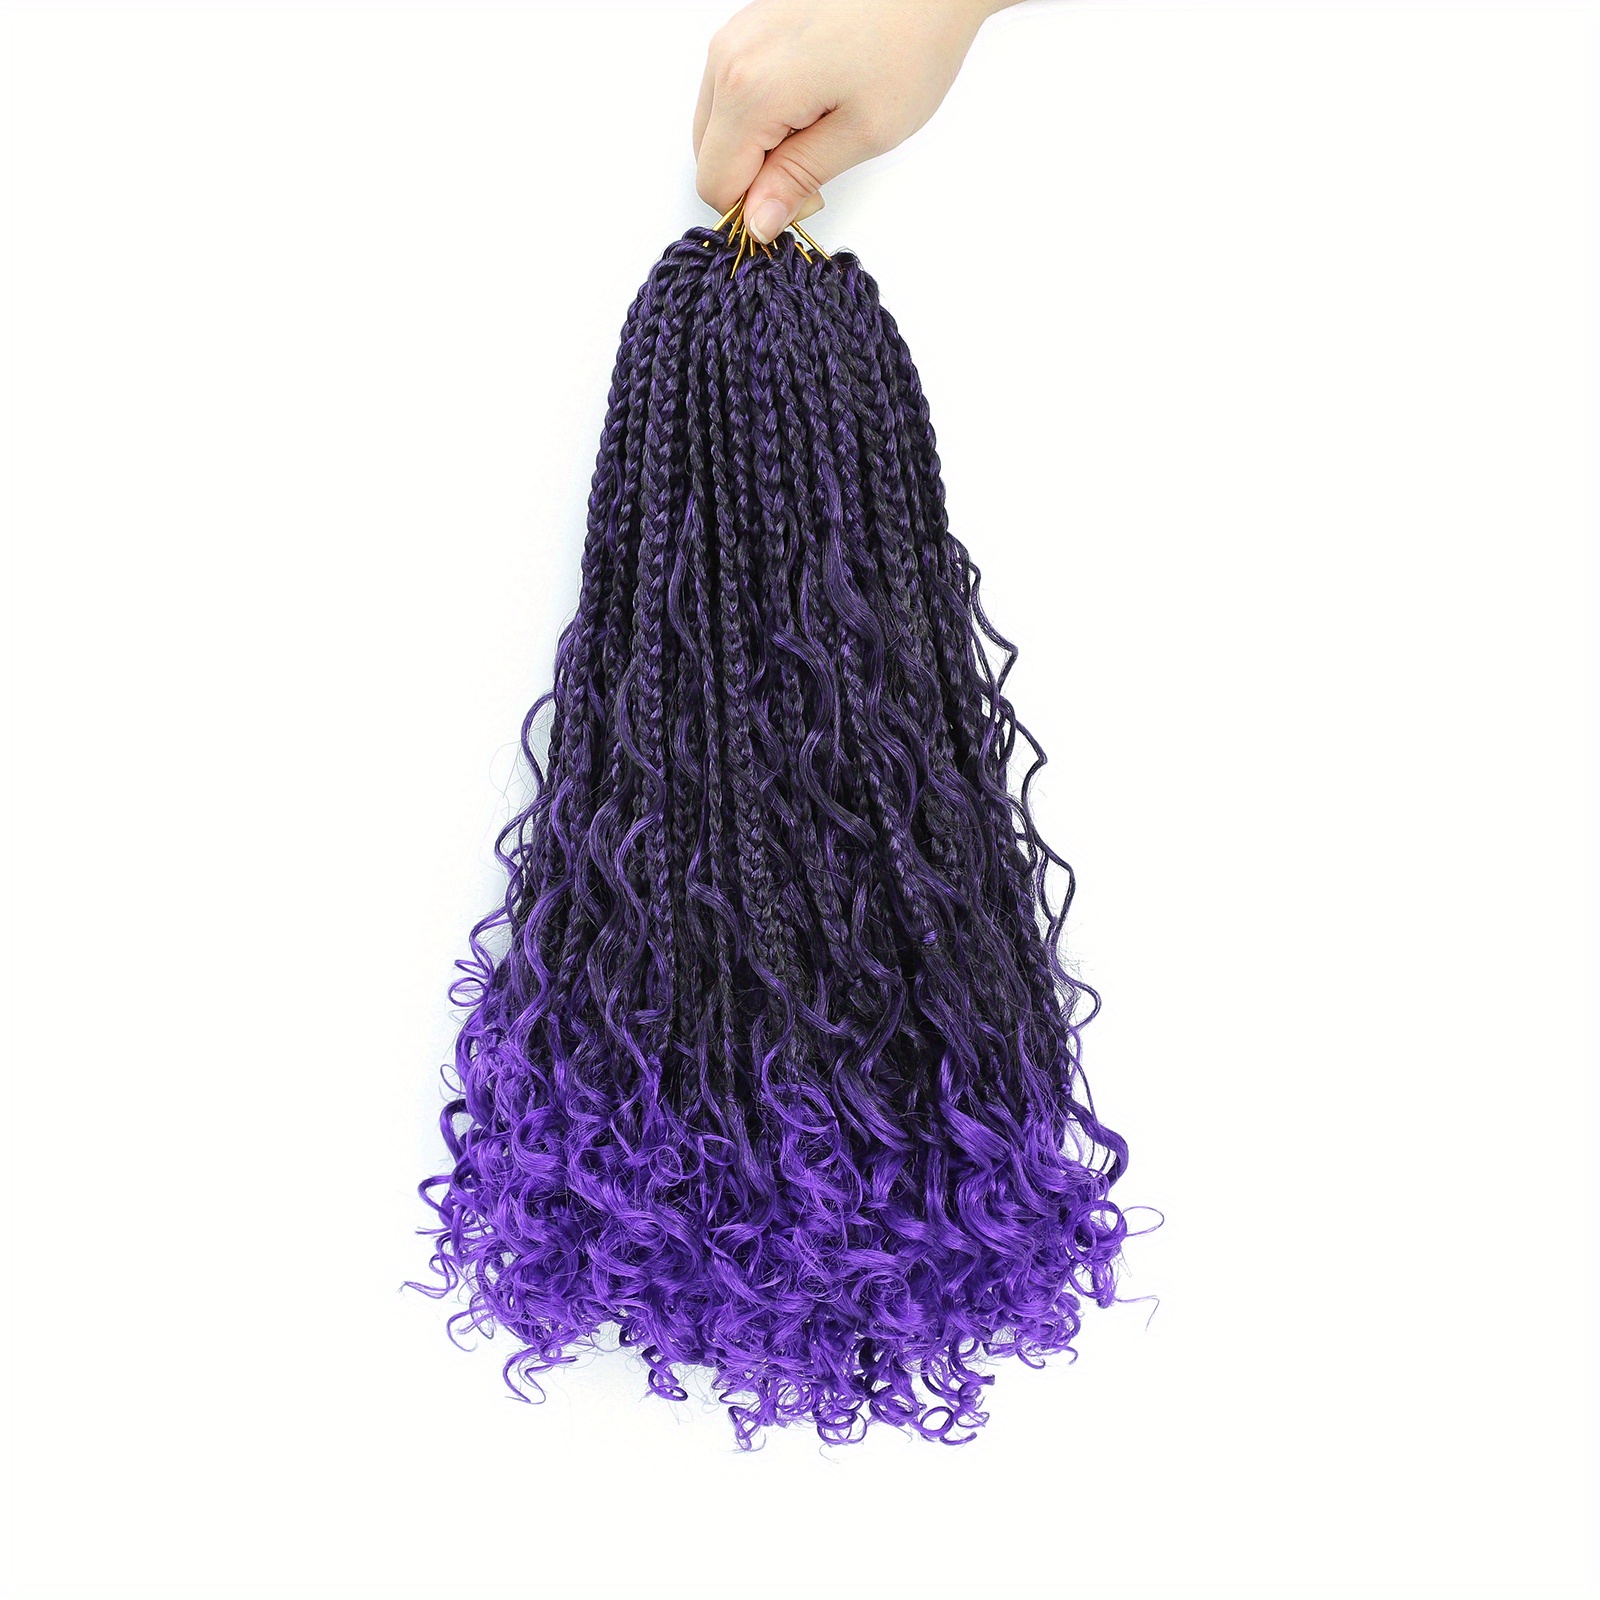  Goddess Bohemian Box Braids Crochet Hair - 14 Inch Curly Ends,  8 Packs Synthetic Braiding Hair Extensions for Black Women (14 Inch, 1B) :  Beauty & Personal Care